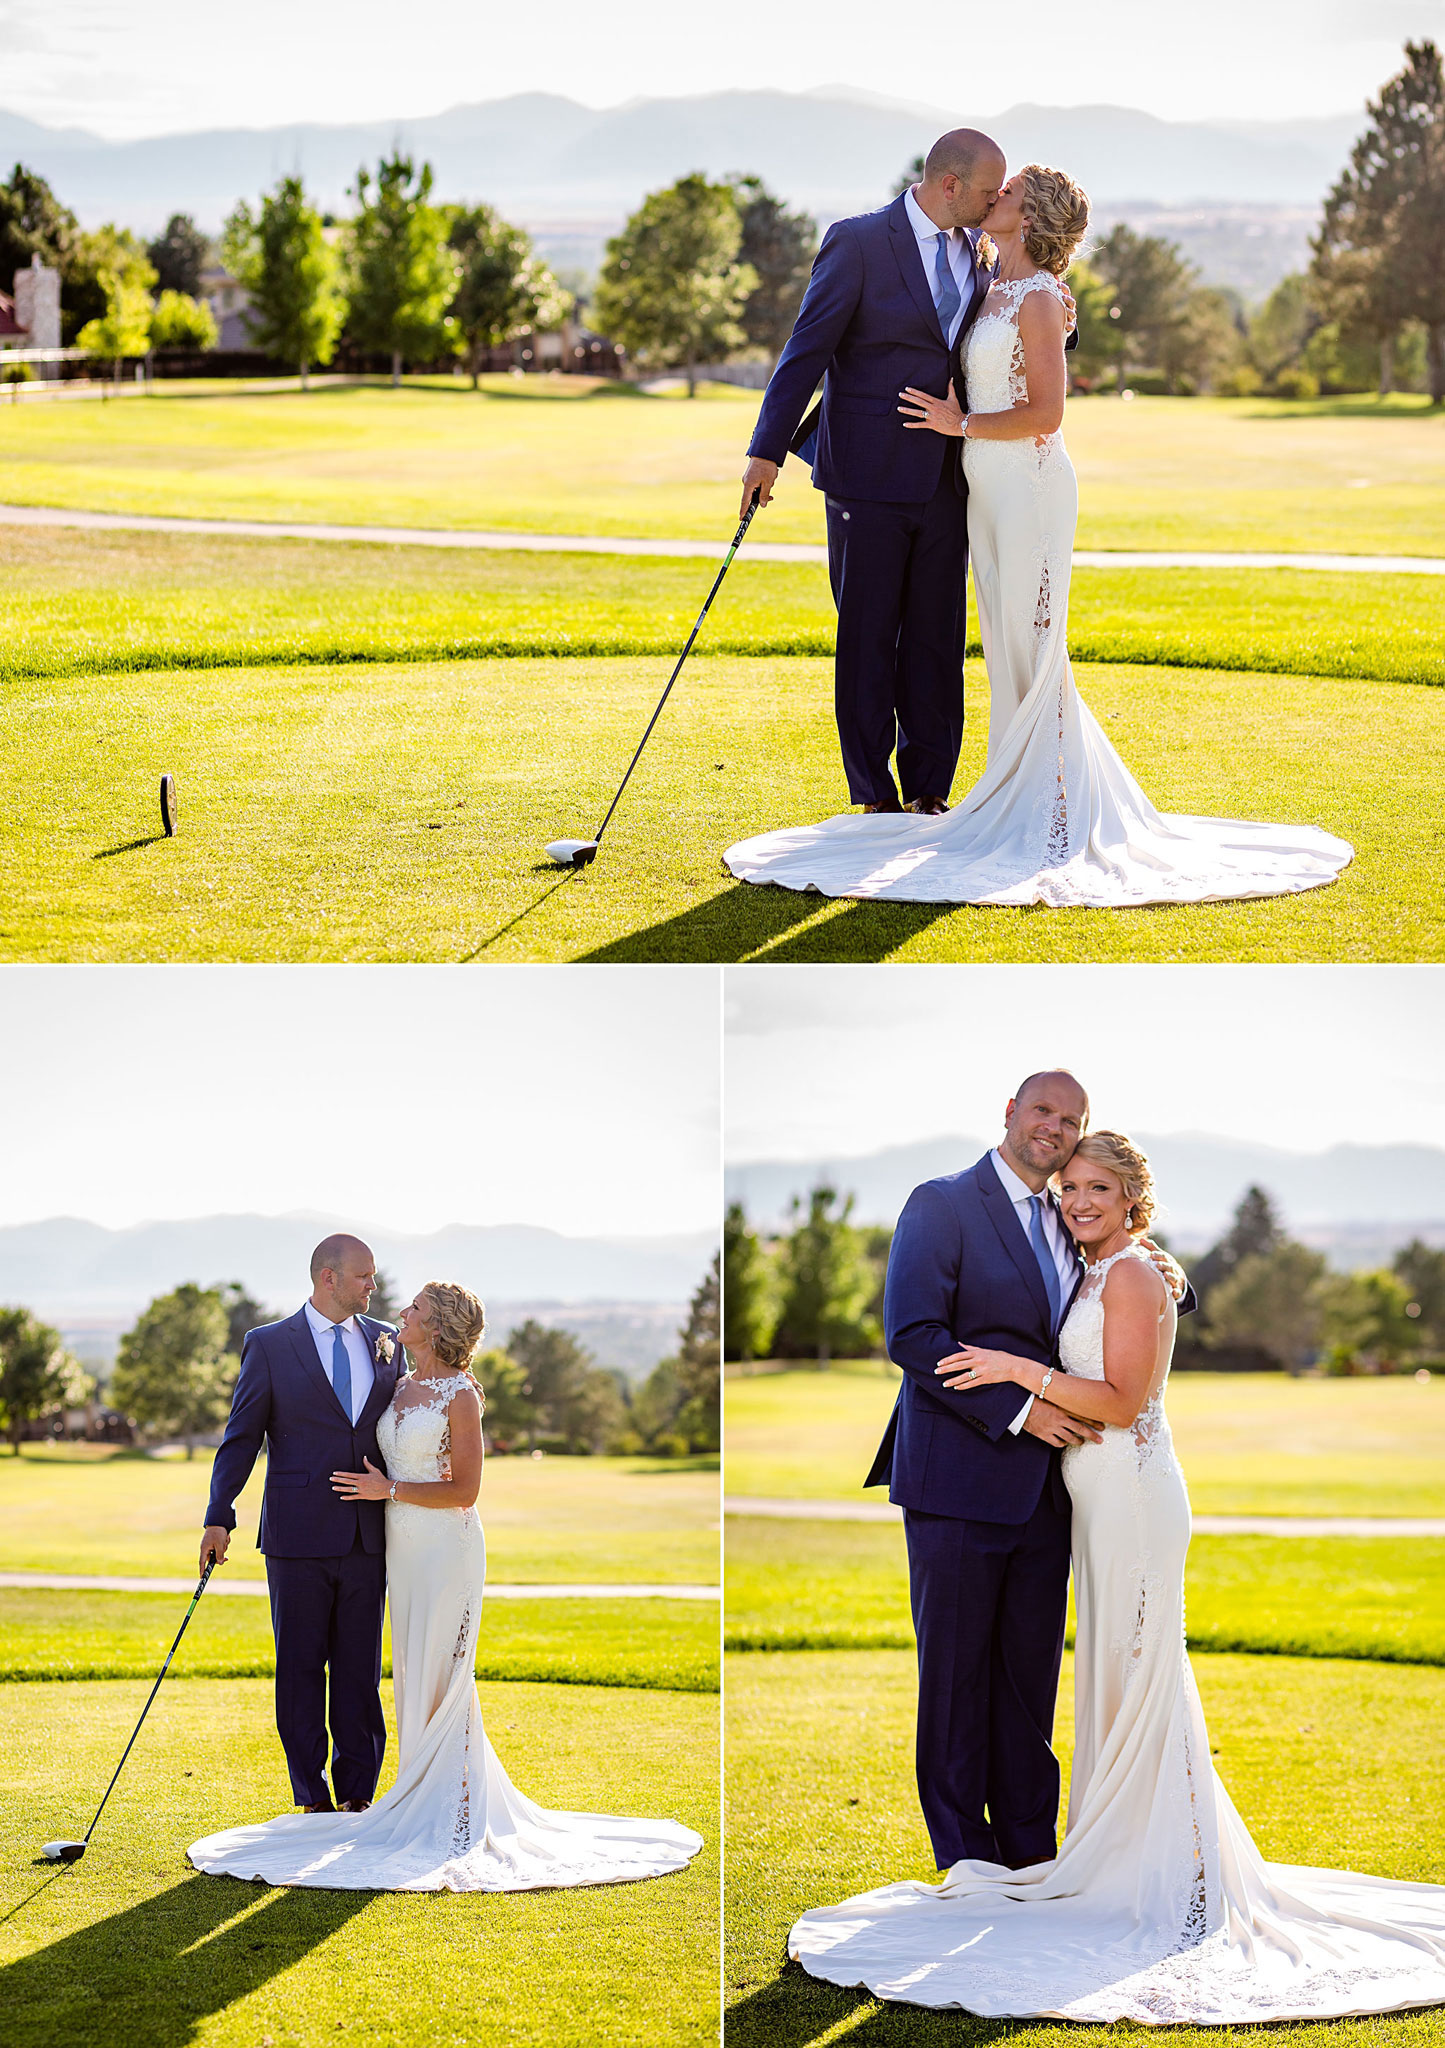 Bride and Groom embracing on the golf course. Kelli & Jason's golf course wedding at The Ranch Country Club by Colorado Wedding Photographer Jennifer Garza, Small wedding ideas, Intimate wedding, Golf Course Wedding, Country Club Wedding, Summer Wedding, Golf Wedding, Wedding planning, Colorado Wedding Photographer, Colorado Elopement Photographer, Colorado Elopement, Colorado Wedding, Denver Wedding Photographer, Denver Wedding, Wedding Inspiration, Summer Wedding Inspiration, Covid Wedding